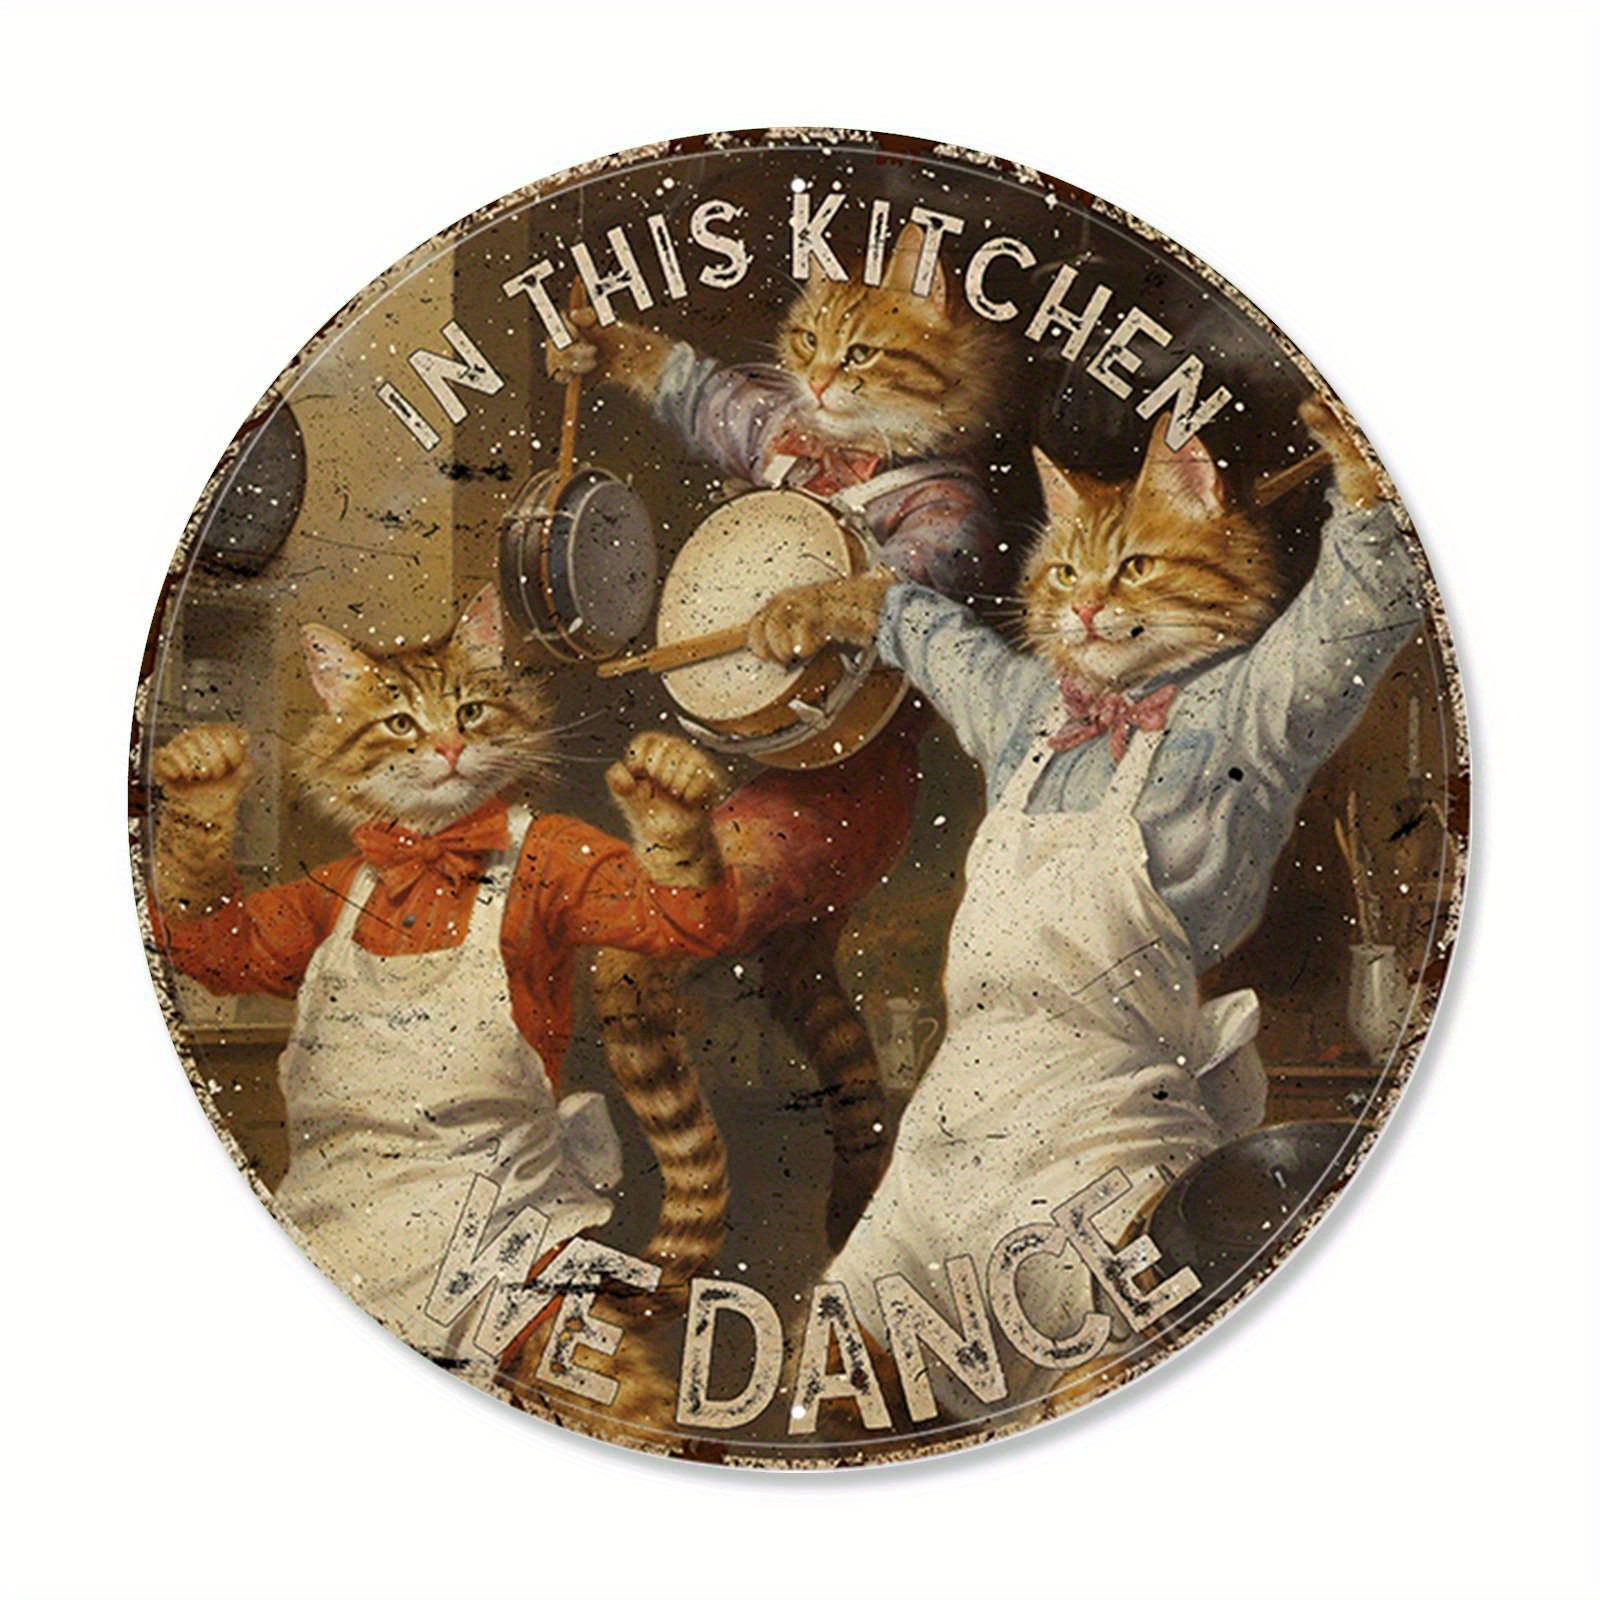 

1pc Round Tin Painting Funny Cat Aluminum Tin Sign, In This Kitchen We Dance Vintage Poster, Love Cooking Vintage Poster, Love Cat Vintage Poster, Cat Cooking Lovers Gift 12x12 Inch (30x30cm)